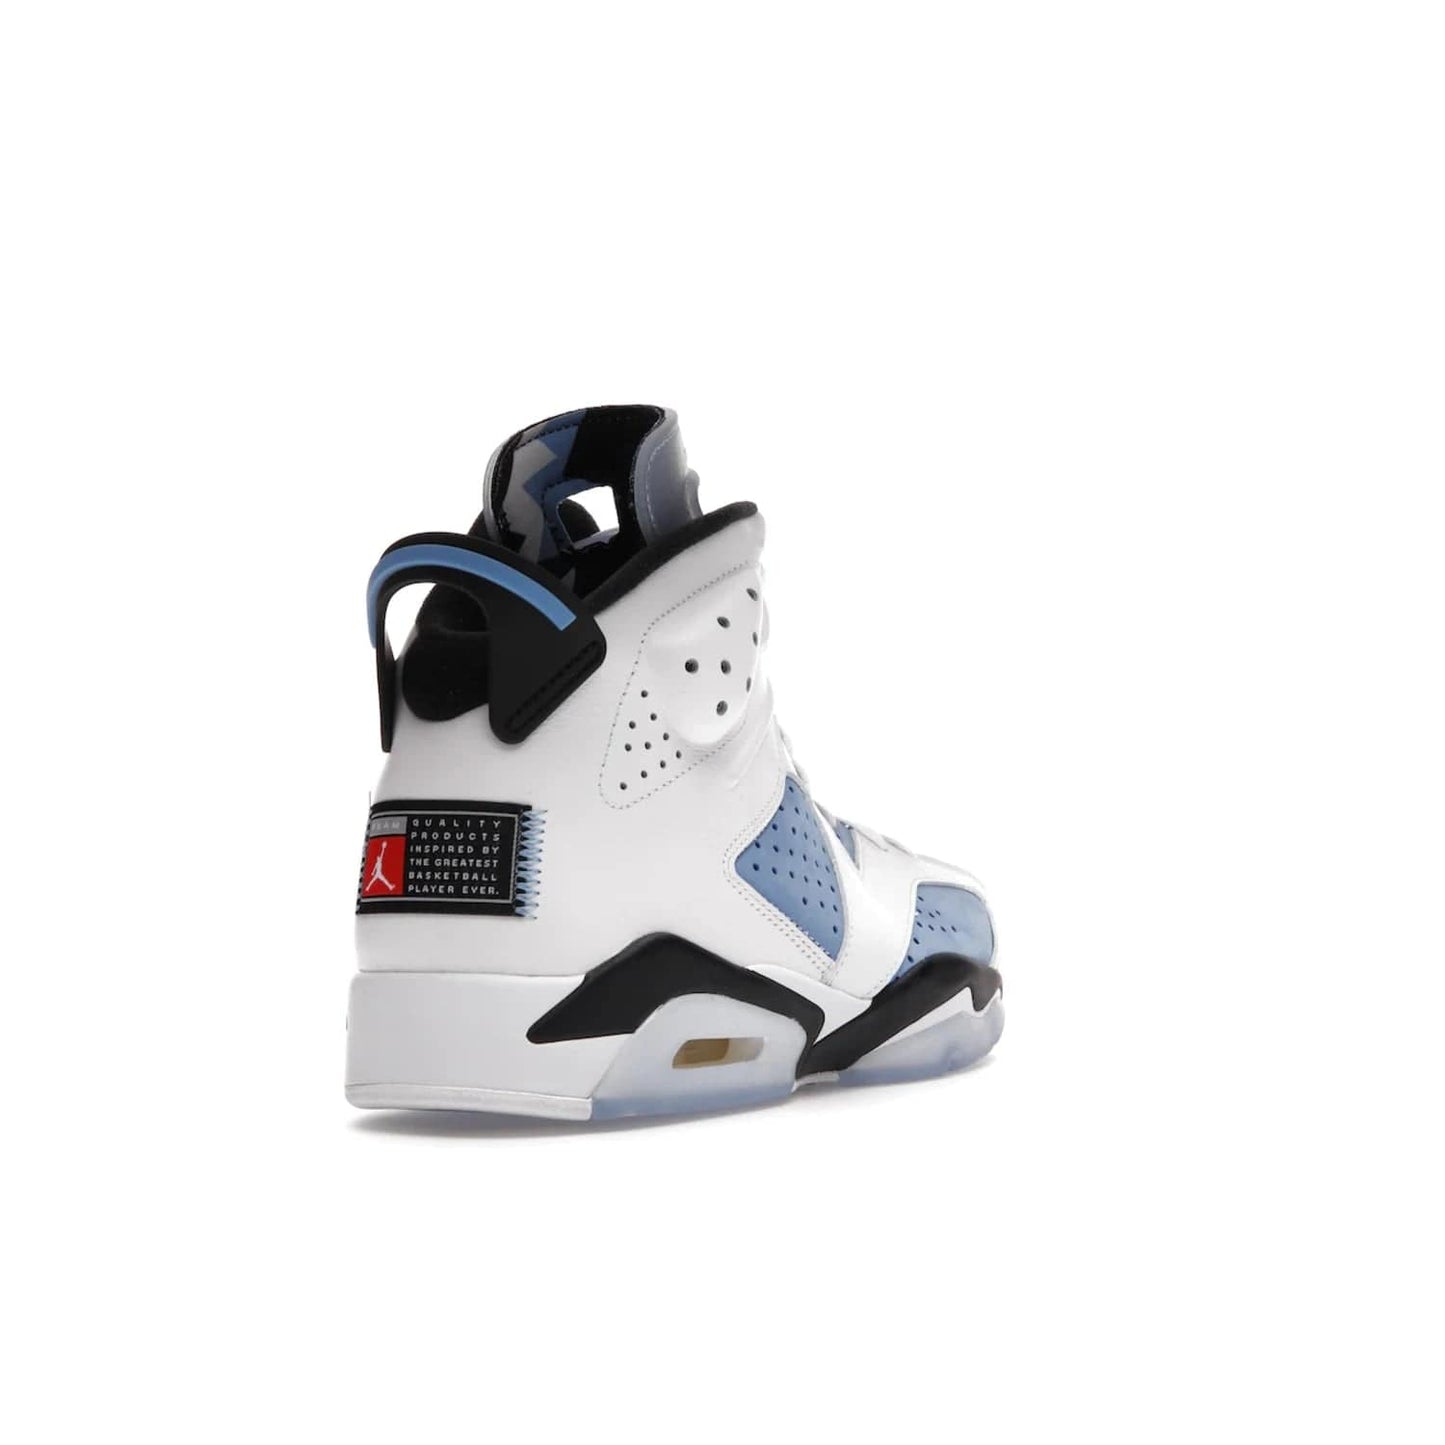 Jordan 6 Retro UNC White - Image 31 - Only at www.BallersClubKickz.com - Air Jordan 6 Retro UNC White with classic UNC colors brings nostalgia and style to a legendary silhouette. Celebrate MJ's alma mater with navy blue accents, icy semi-translucent sole and Jordan Team patch. Out March 2022 for the Sneaker Enthusiast.